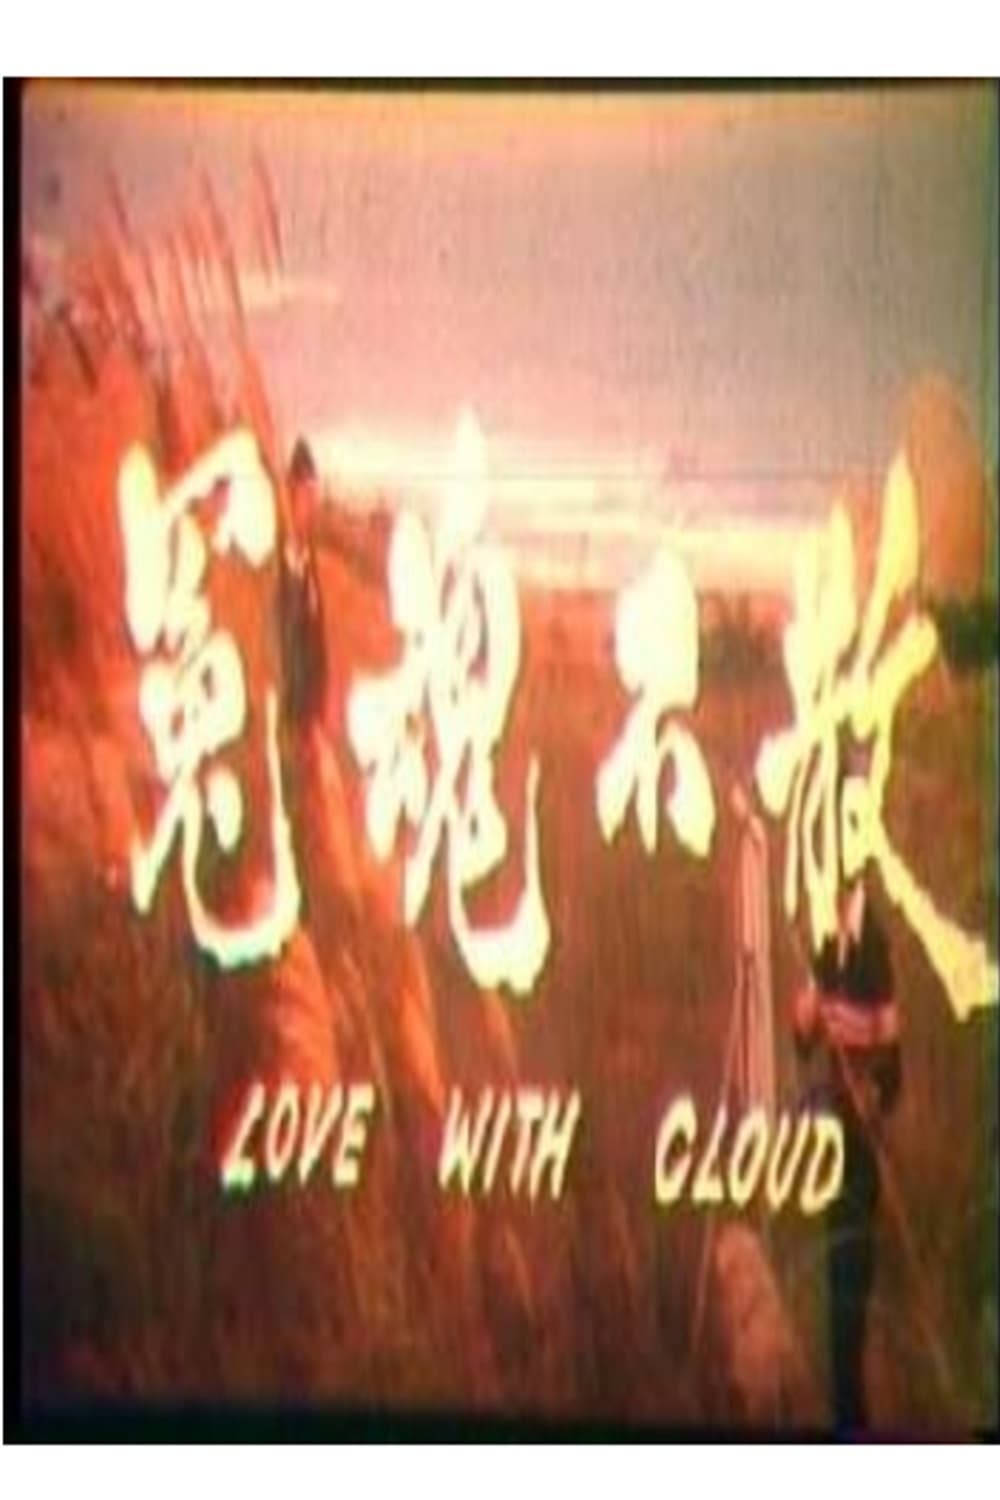 Love with Cloud